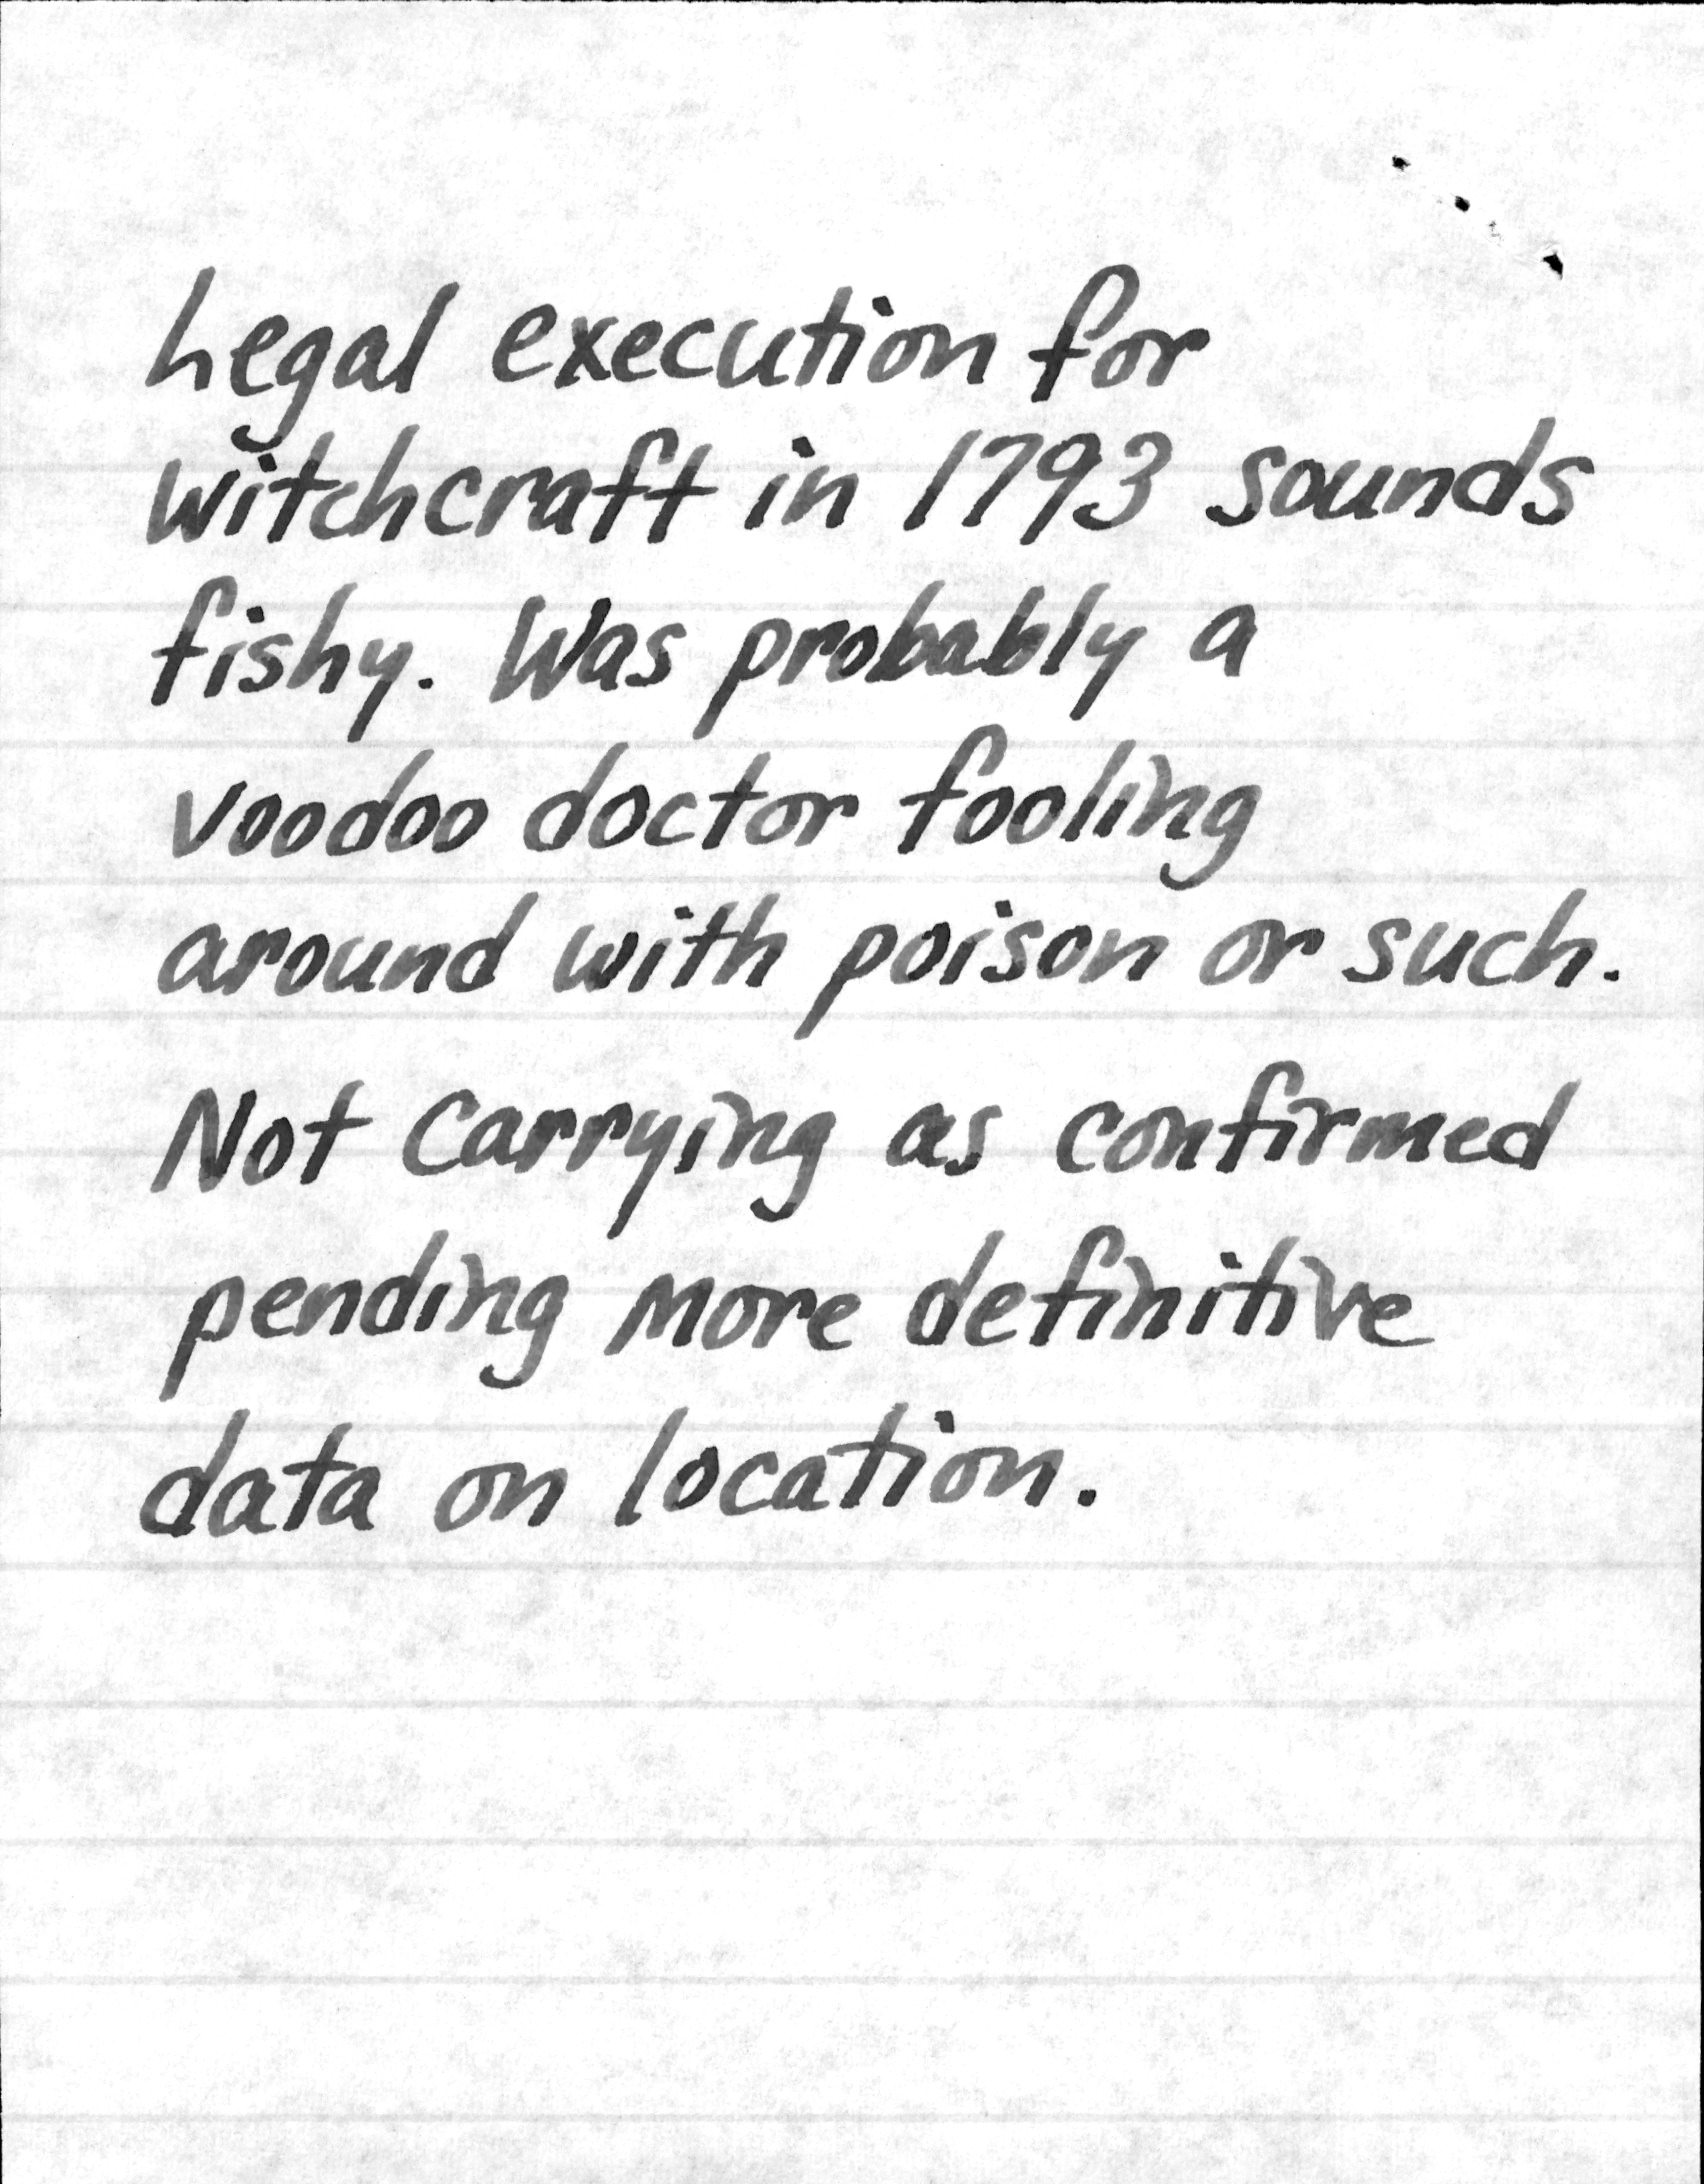 Note of unconfirmed execution: "Legal Execution for Witchcraft in 1793 sounds fishy..."